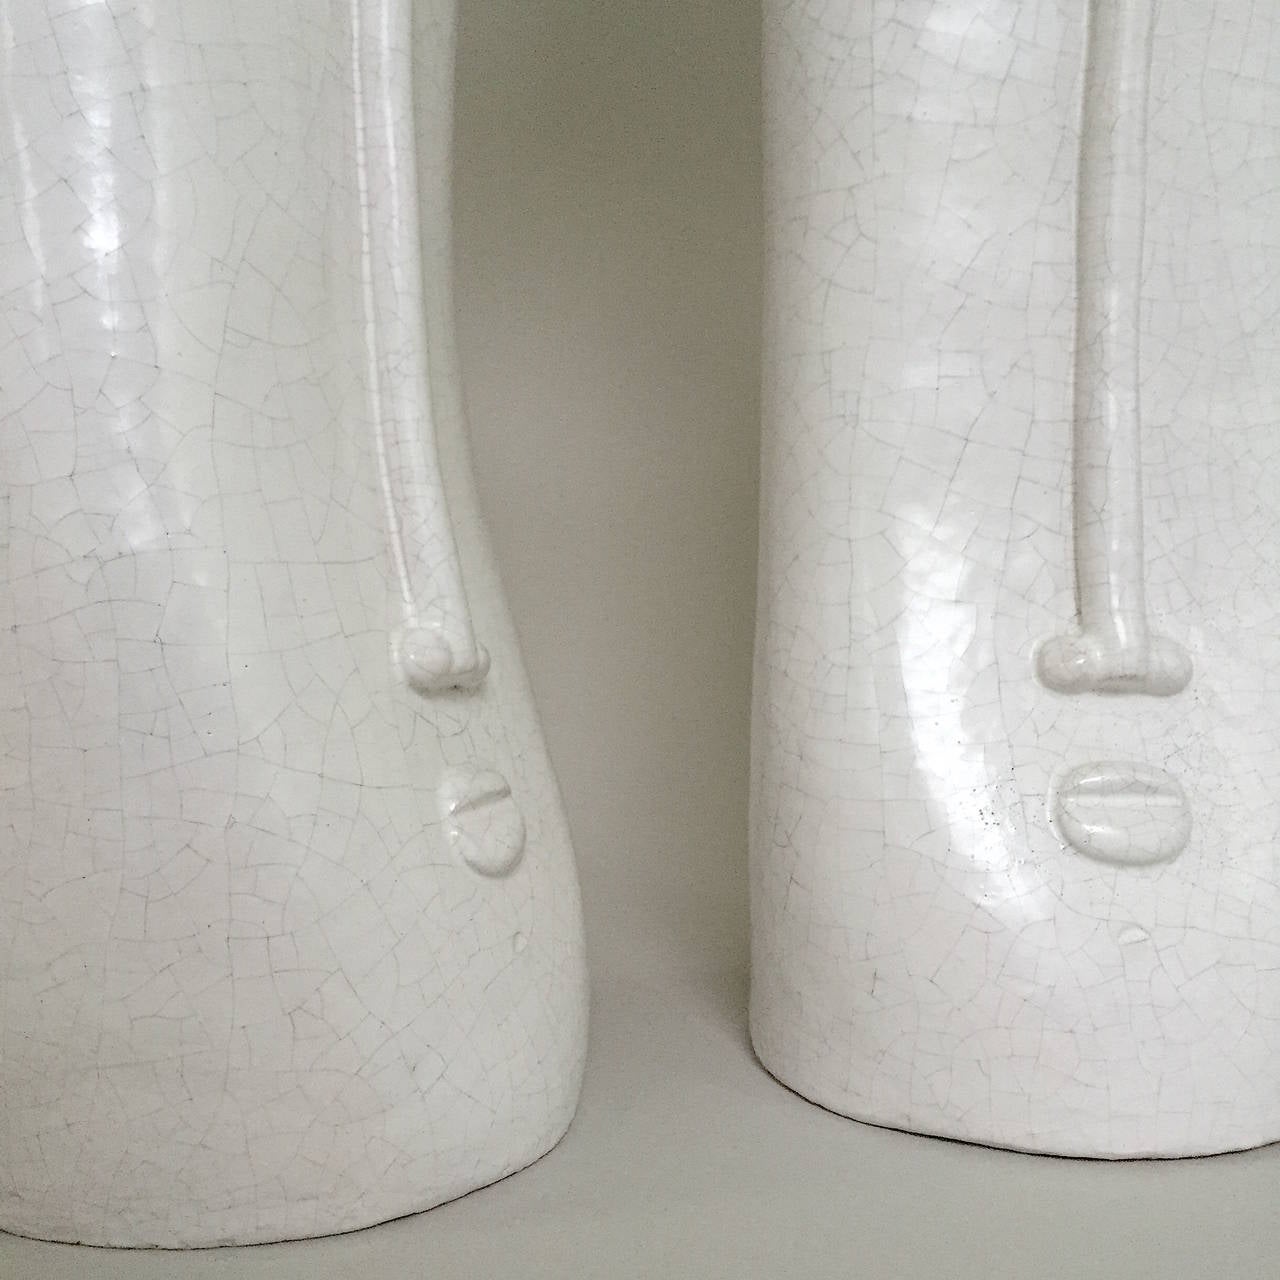 Large Pair of Ceramic Lamp Bases Signed by DaLo 1